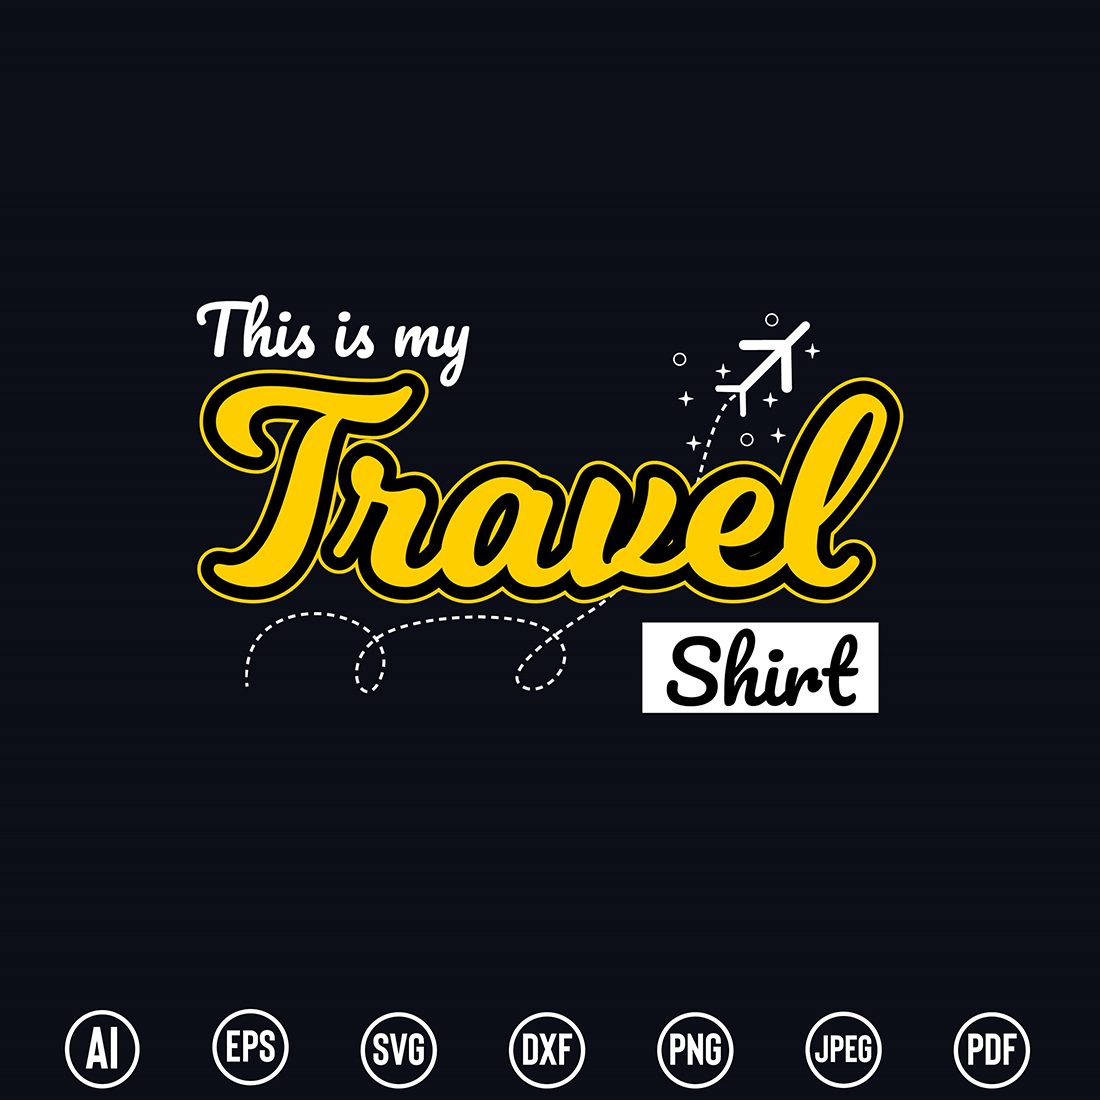 Modern Typography Traveler T-Shirt design with “This is my travel Shirt” quote for t-shirt, posters, stickers, mug prints, banners, gift cards, labels etc preview image.